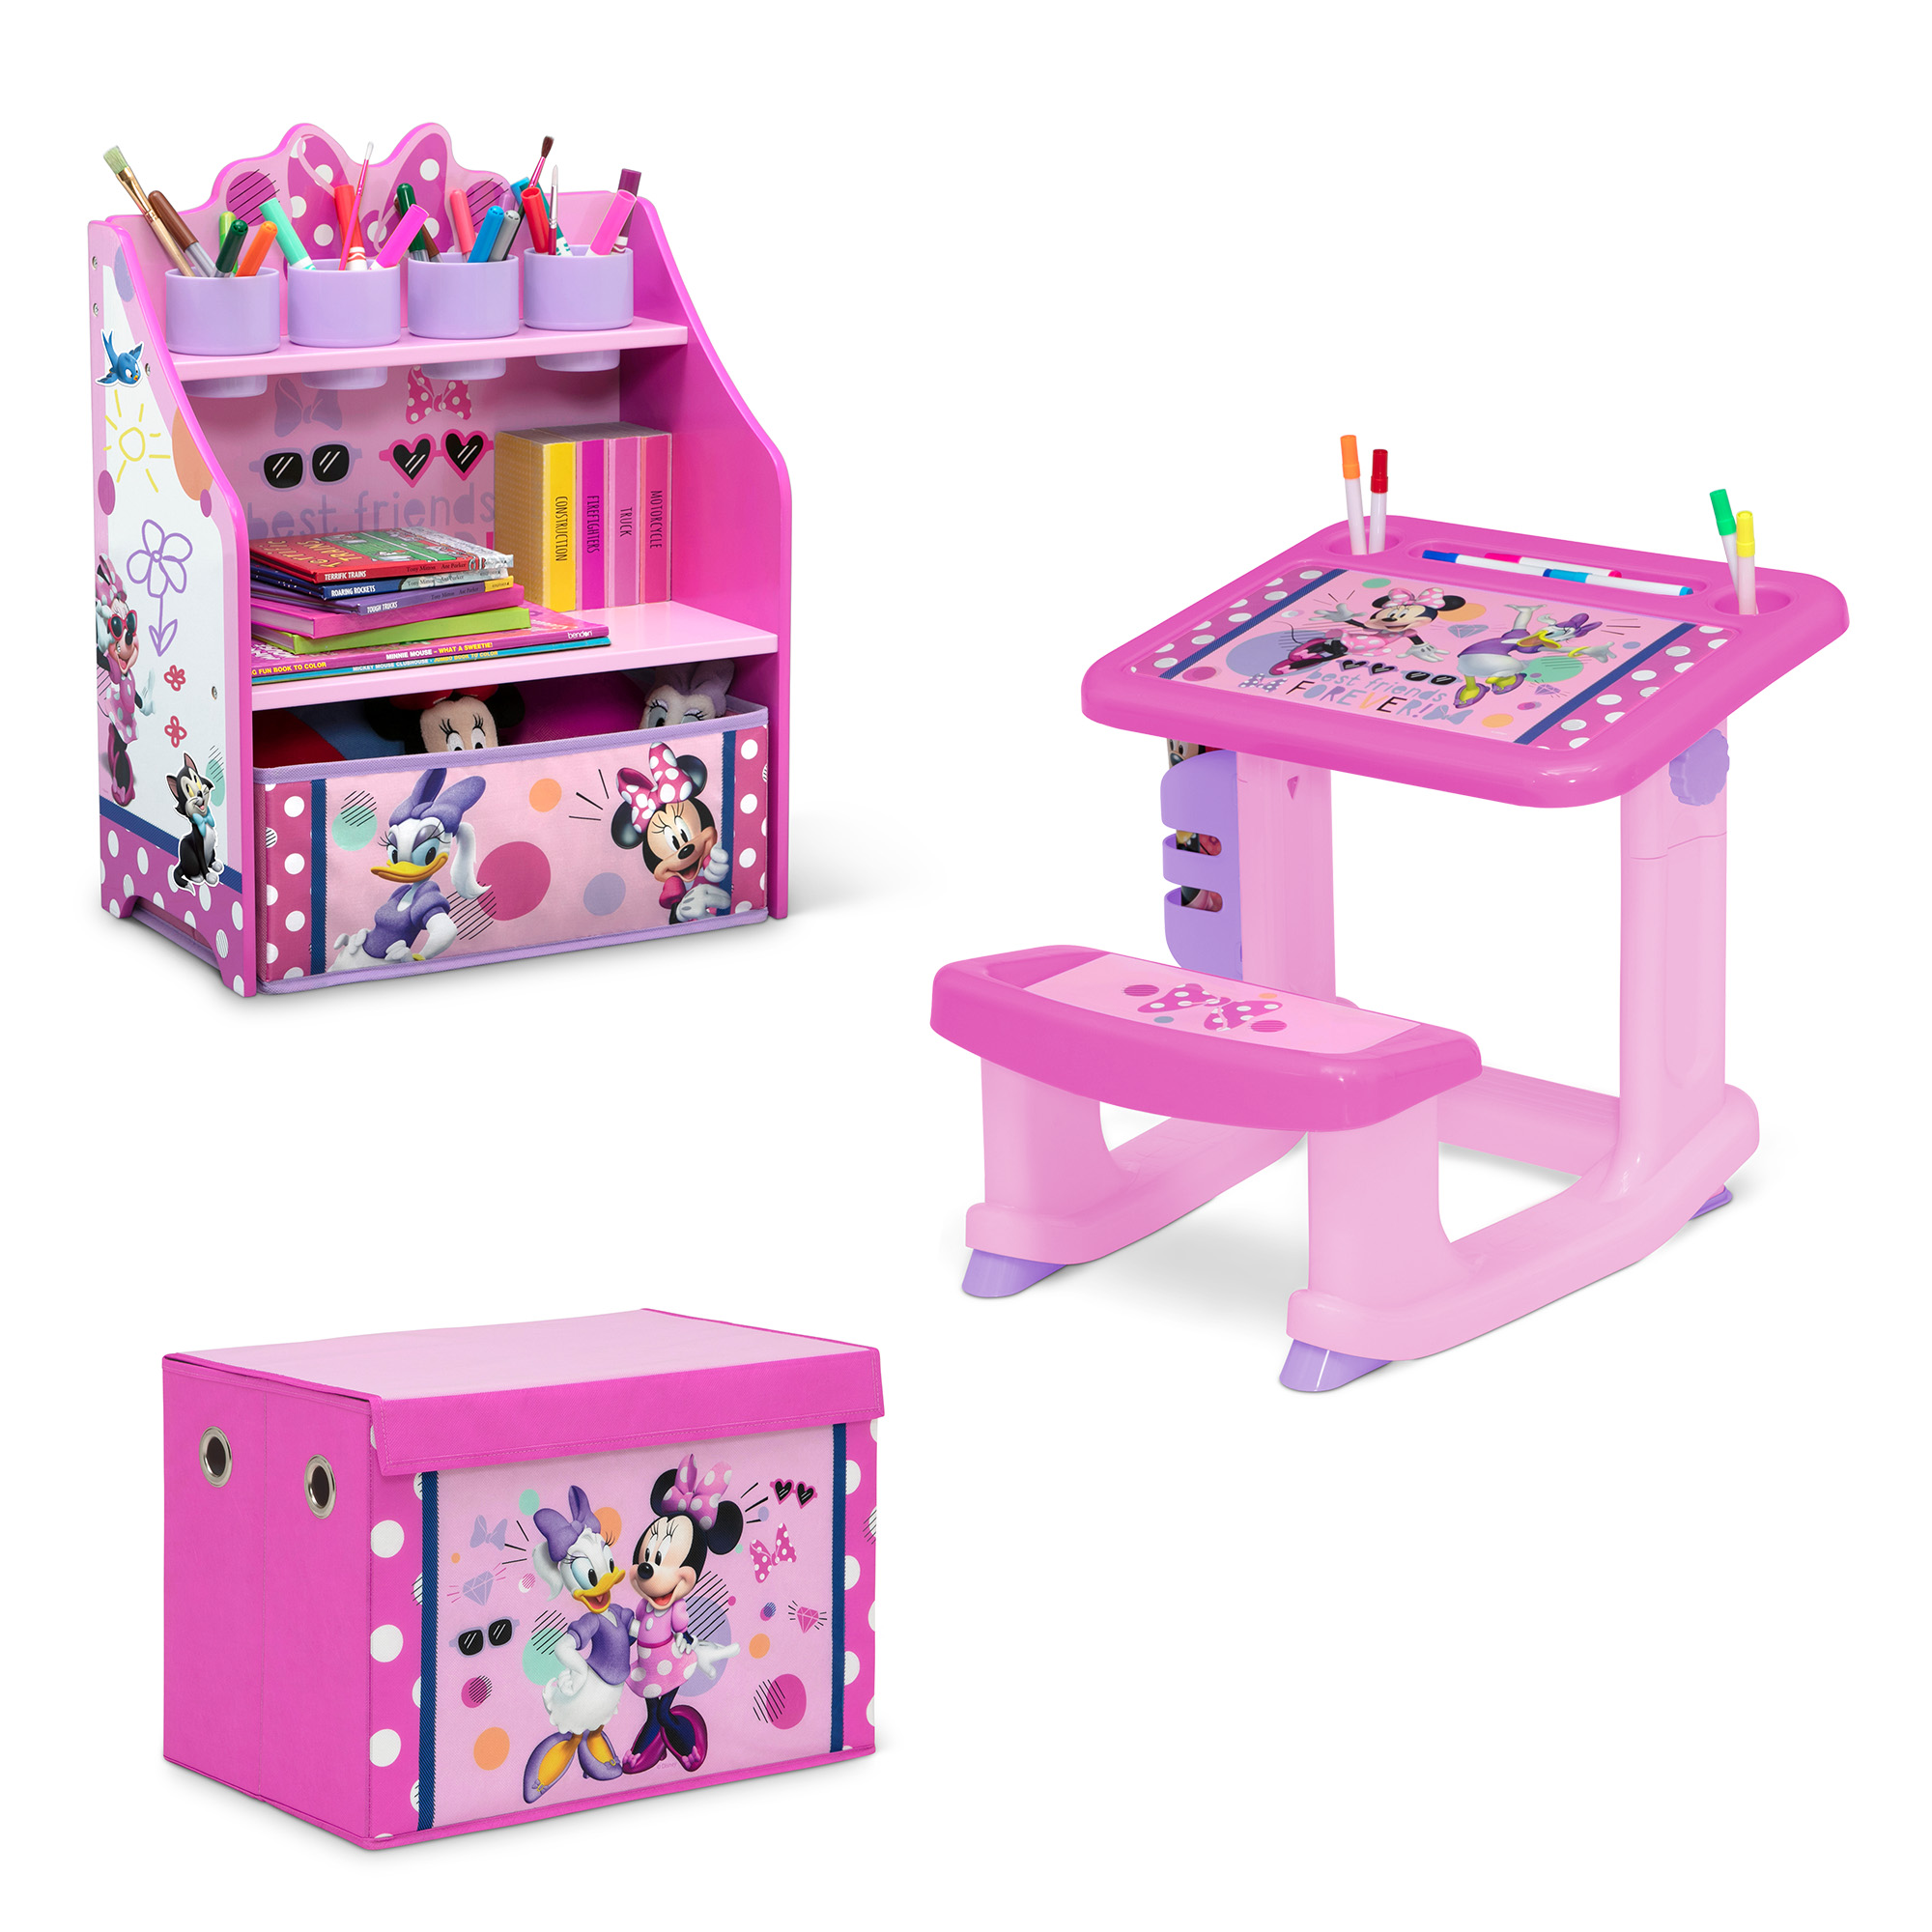 Minnie Mouse 3-Piece Art & Play Toddler Room-in-a-Box by Delta Children – Includes Draw & Play Desk, Art & Storage Station & Fabric Toy Box, Pink - image 1 of 11